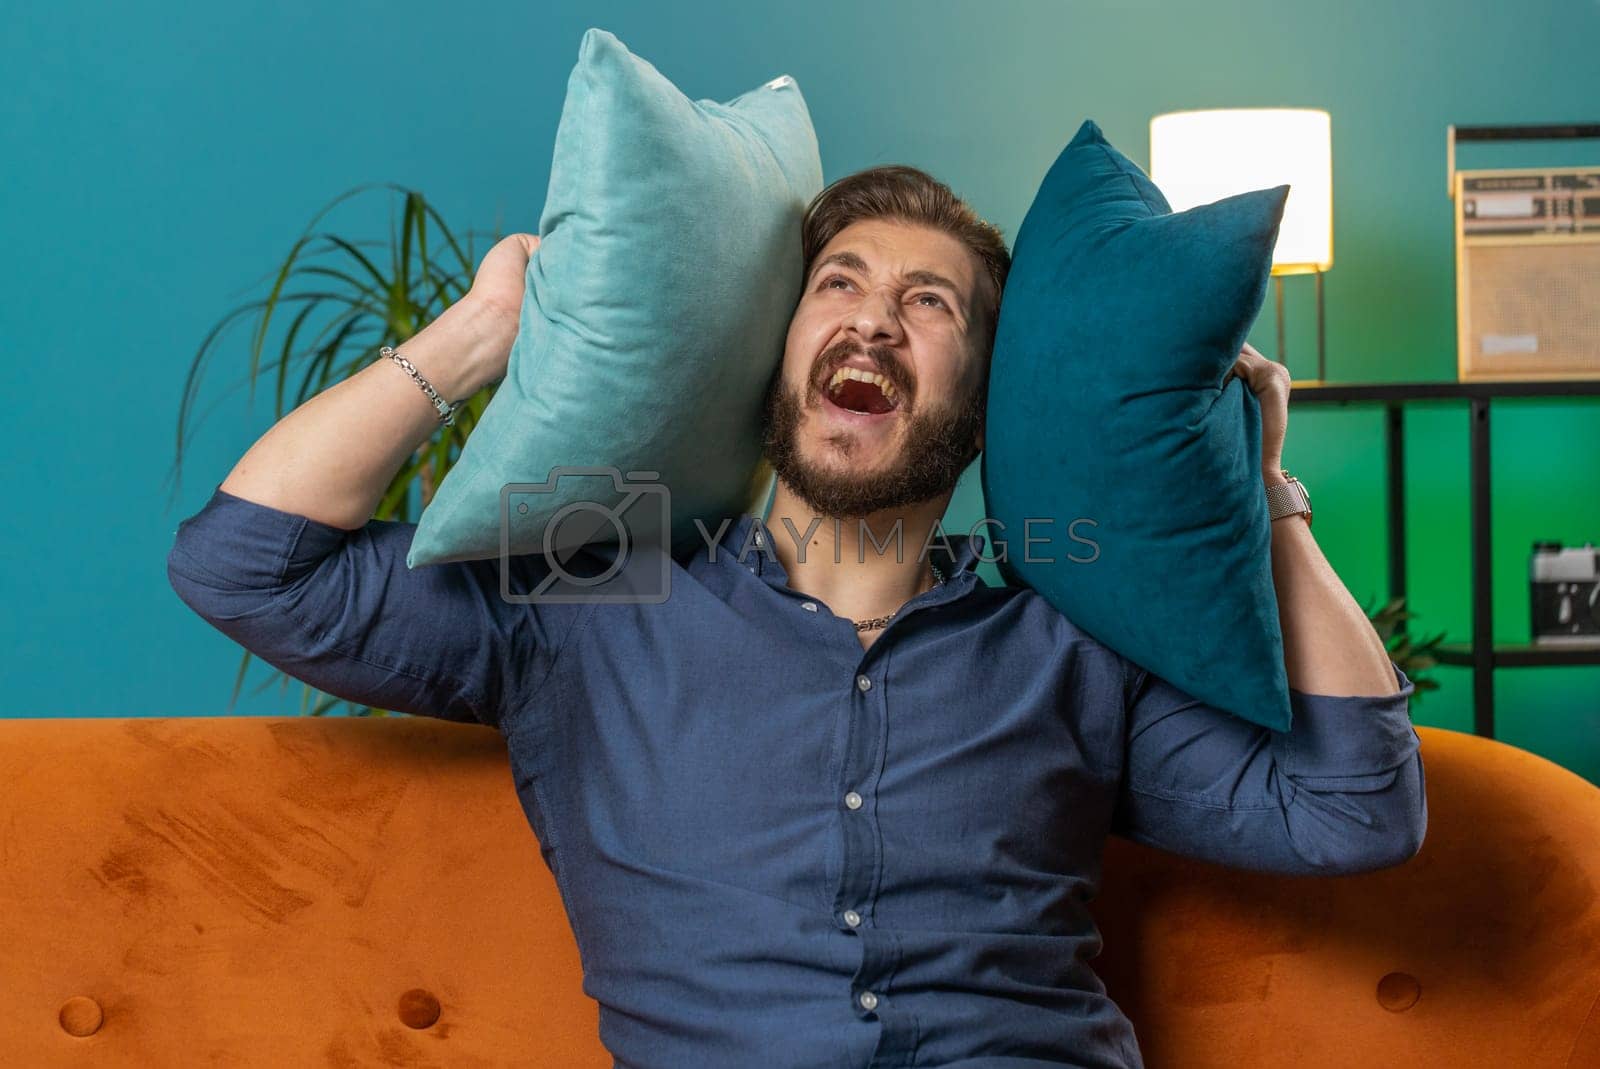 Royalty free image of Repair work at neighbours concept, irritated man at home cover ears with pillows annoyed by noise by efuror